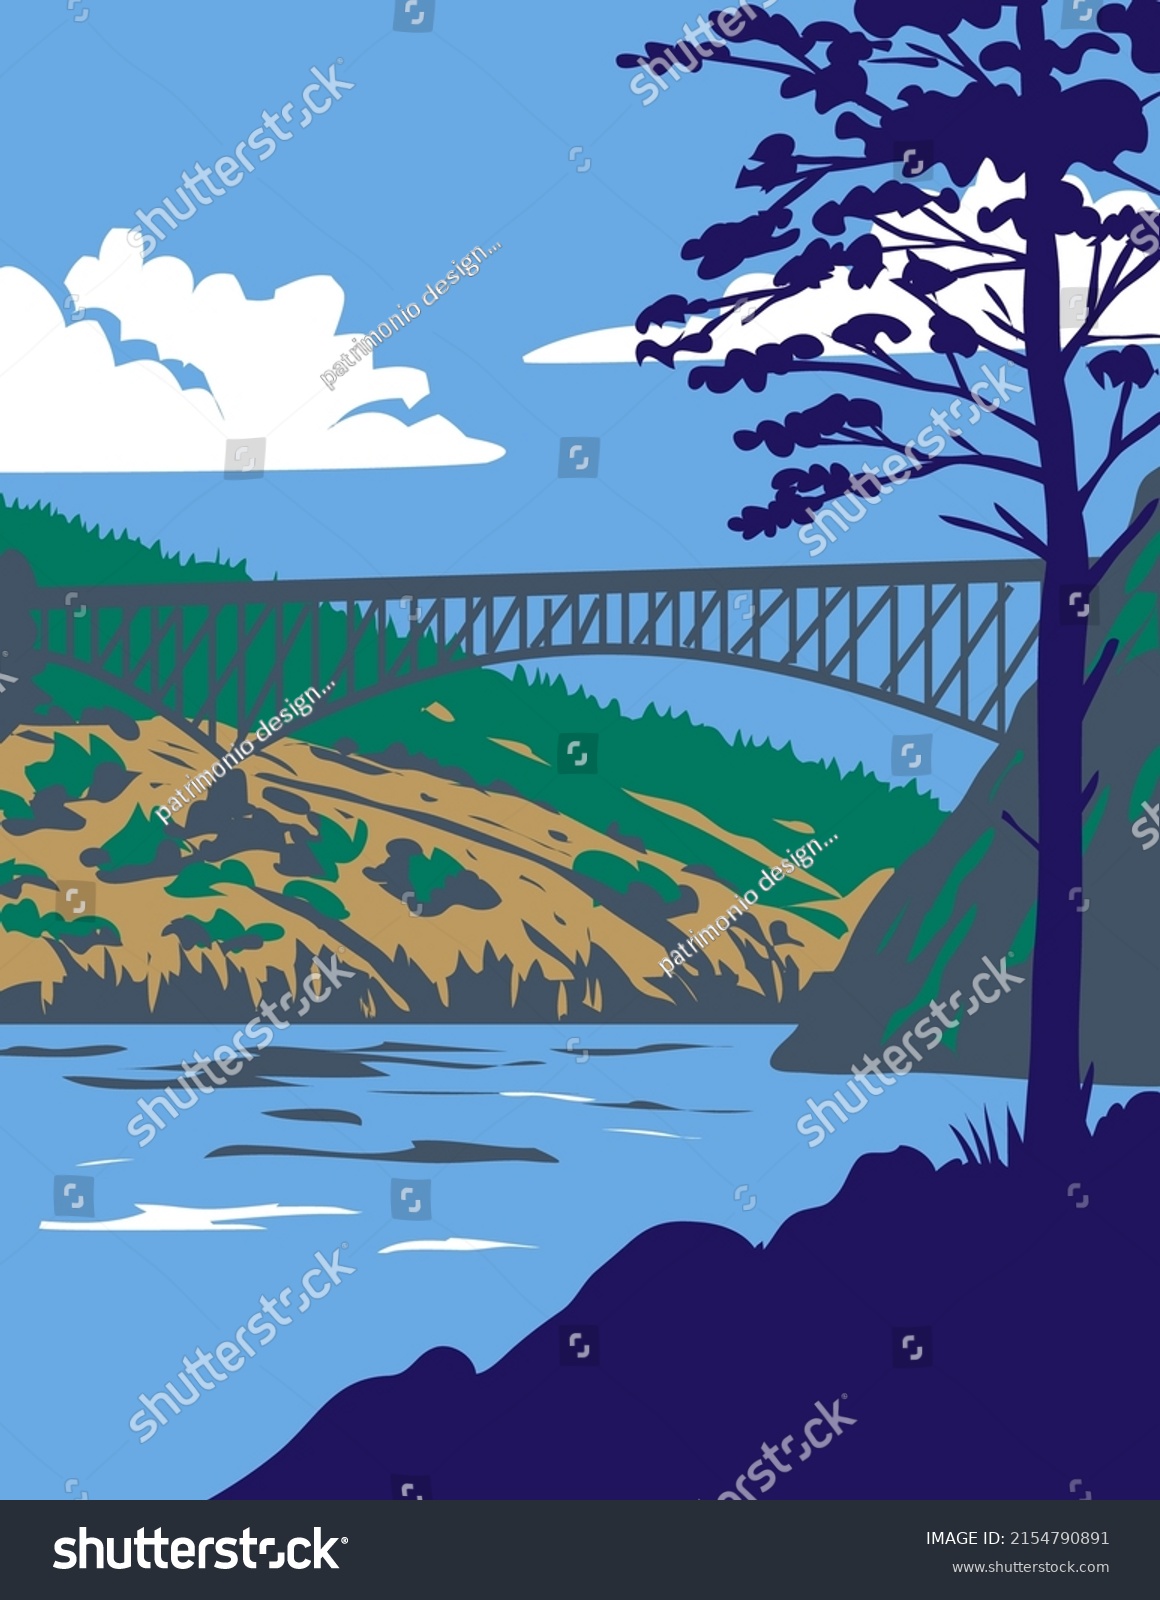 SVG of Retro WPA illustration of Deception Pass State Park with Whidbey Island and Fidalgo Island, in Washington State. USA done in works project administration or federal art project style. svg